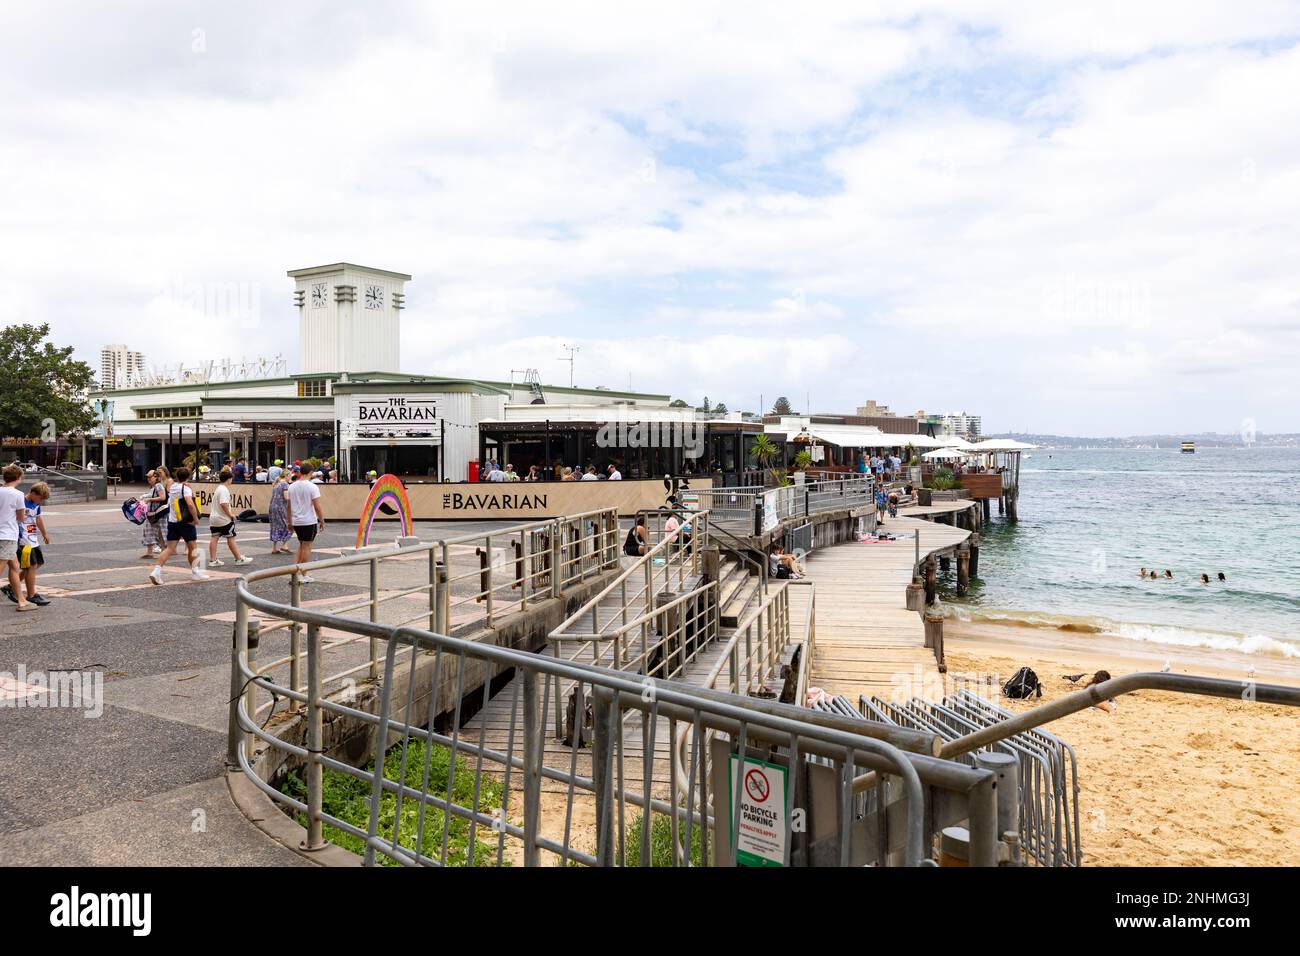 Manly Wharf in Sydney, restaurants and bars and ferry wharf for ferries, including Bavarian beer cafe restaurant,Sydney,Australia Stock Photo